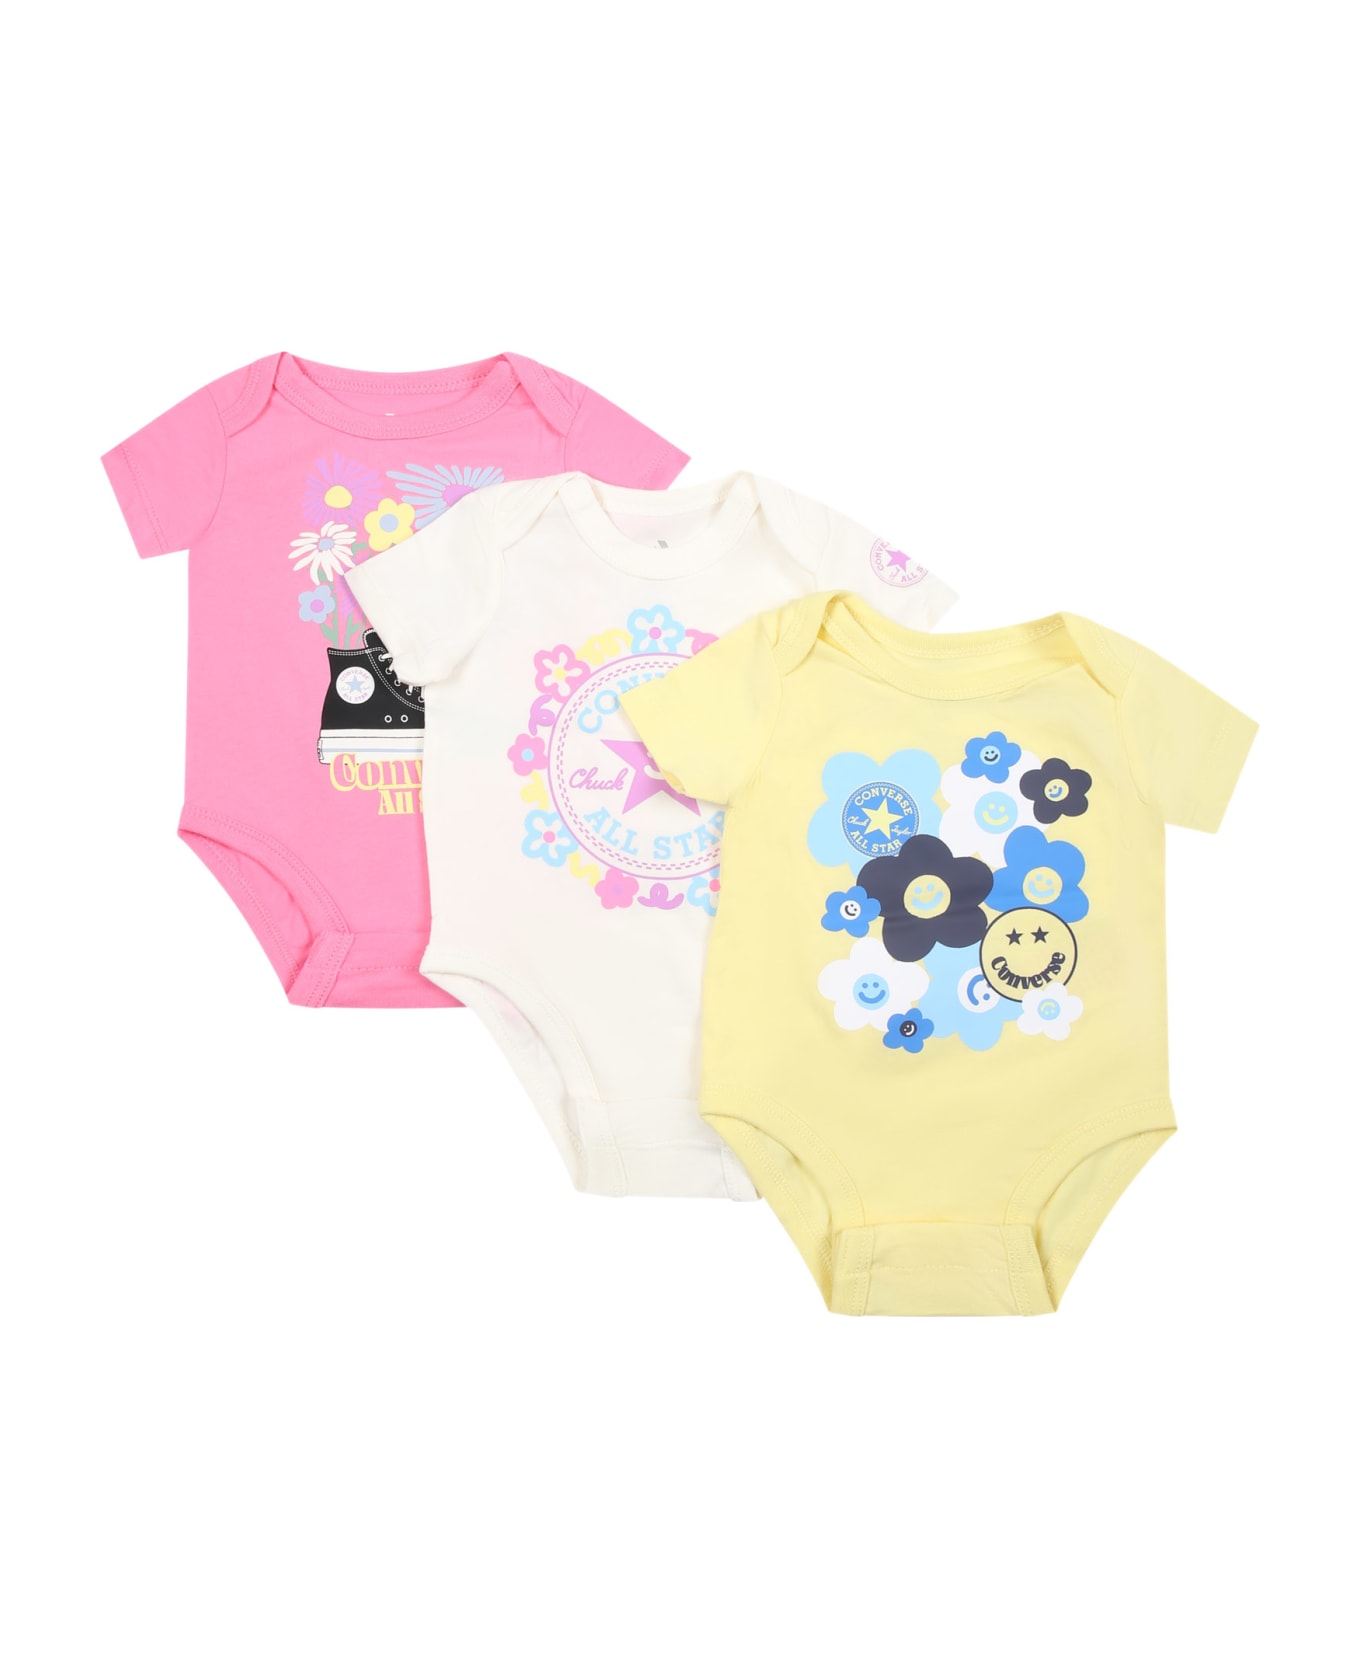 Converse Multicolor Set For Baby Girl With Logo And Print - Multicolor